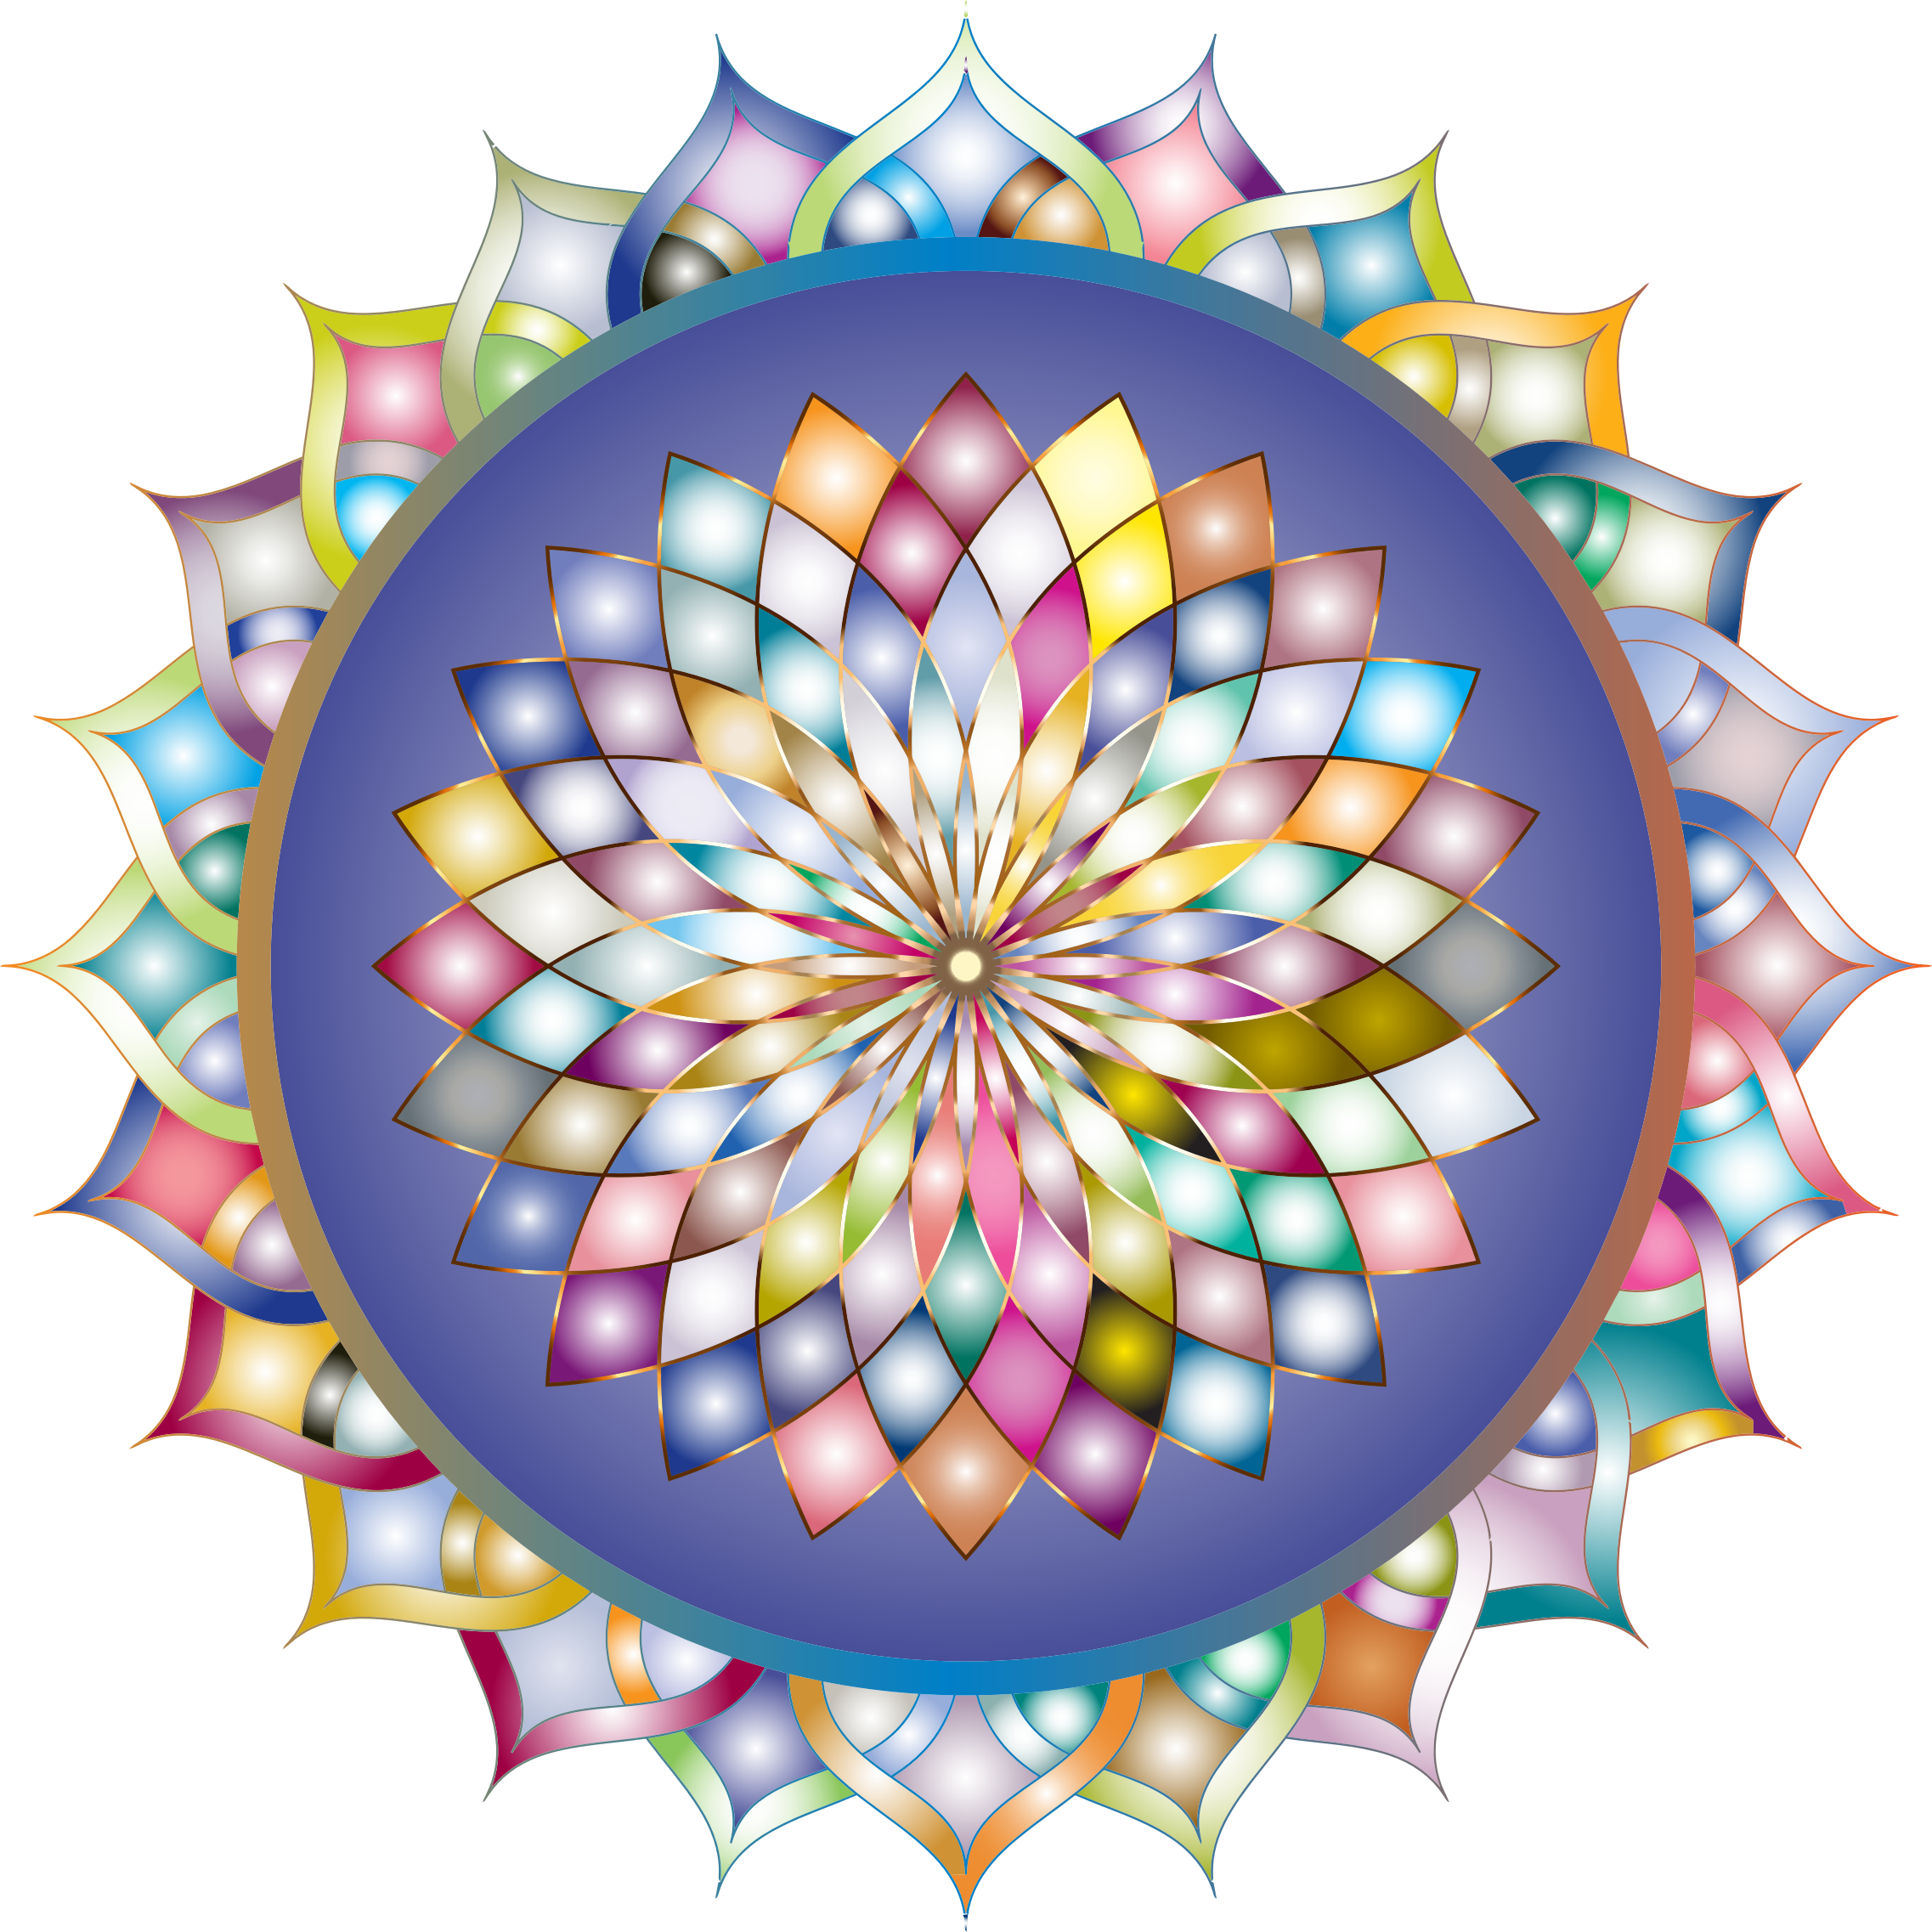 Download Mandala clipart graphic, Mandala graphic Transparent FREE for download on WebStockReview 2020